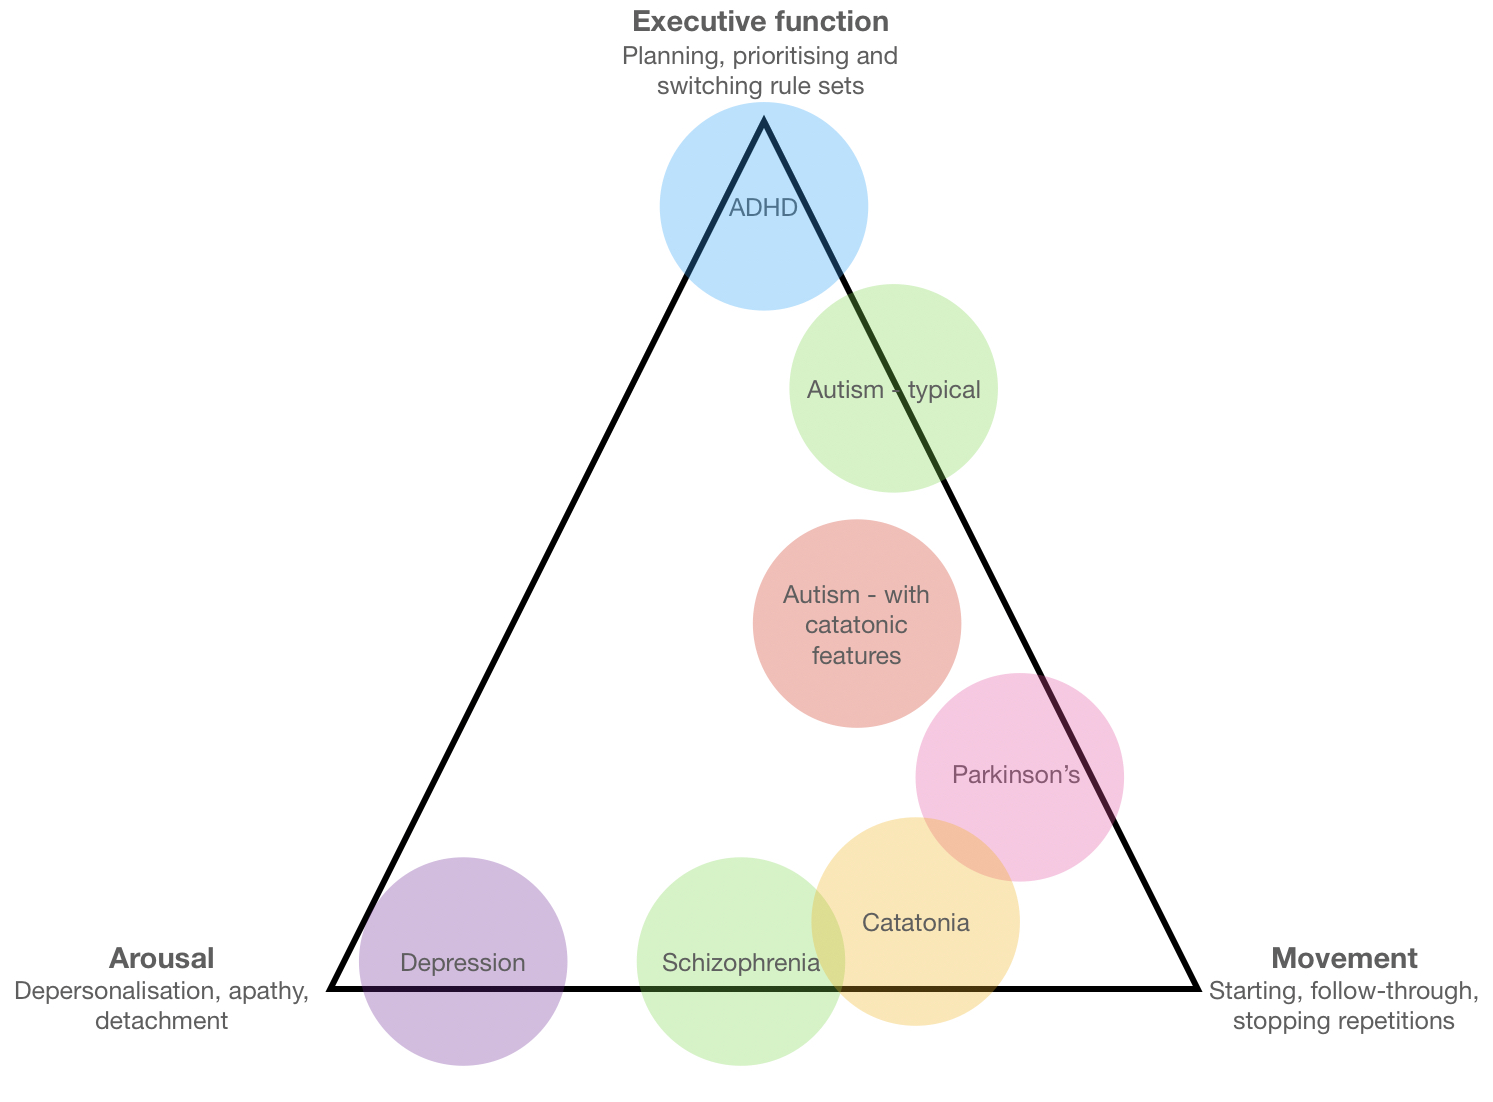 Diagram of a triangle with ‘executive function’, ‘motor initiation’ and ‘emotional arousal’ at the points. Various neurological and psychiatric conditions are shown within the triangle. Their location relative to the three points illustrates how much each of the components is part of these conditions.